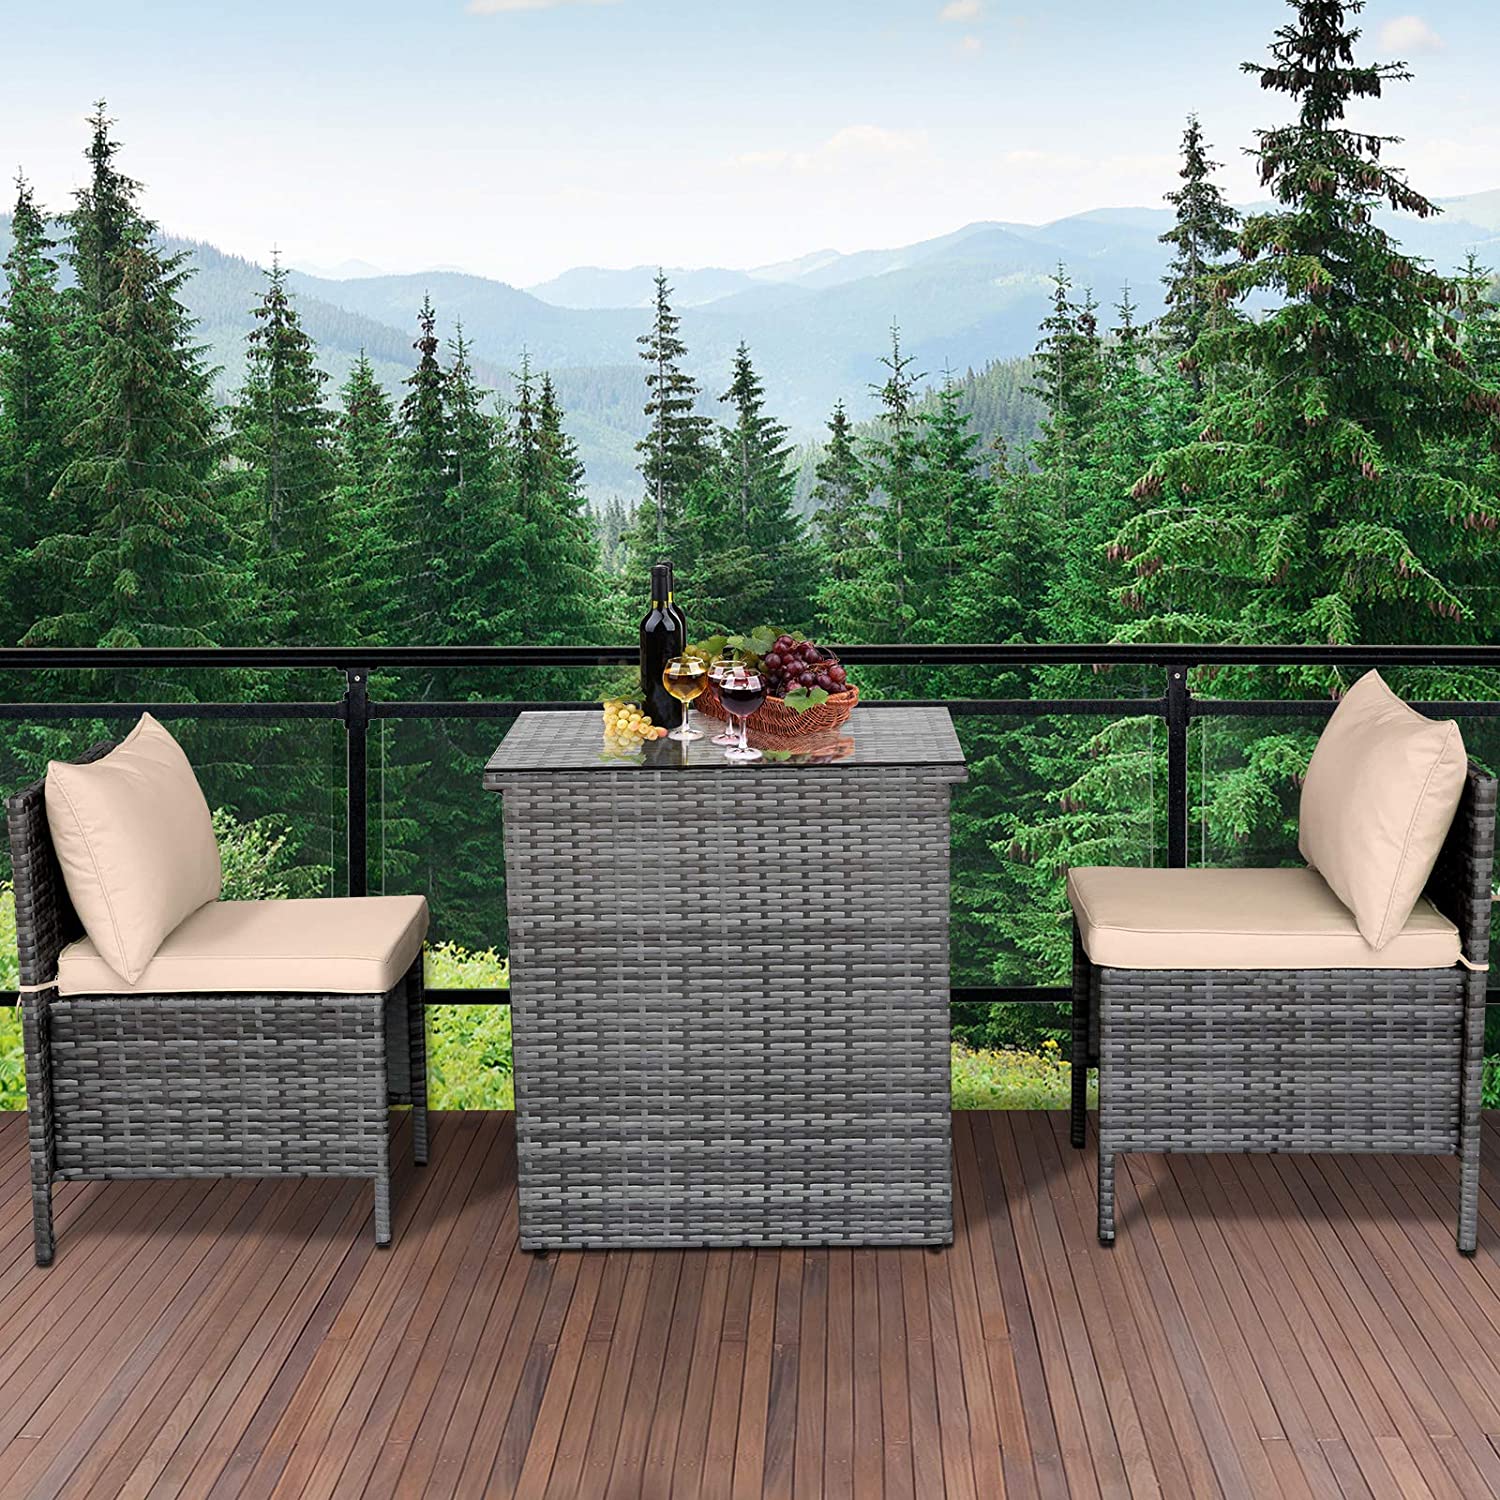 3 Piece Outdoor PE Rattan Furniture Bistro Set Patio Wicker Conversation Chair with Glass Top Table Patio Furniture For Small Spaces 